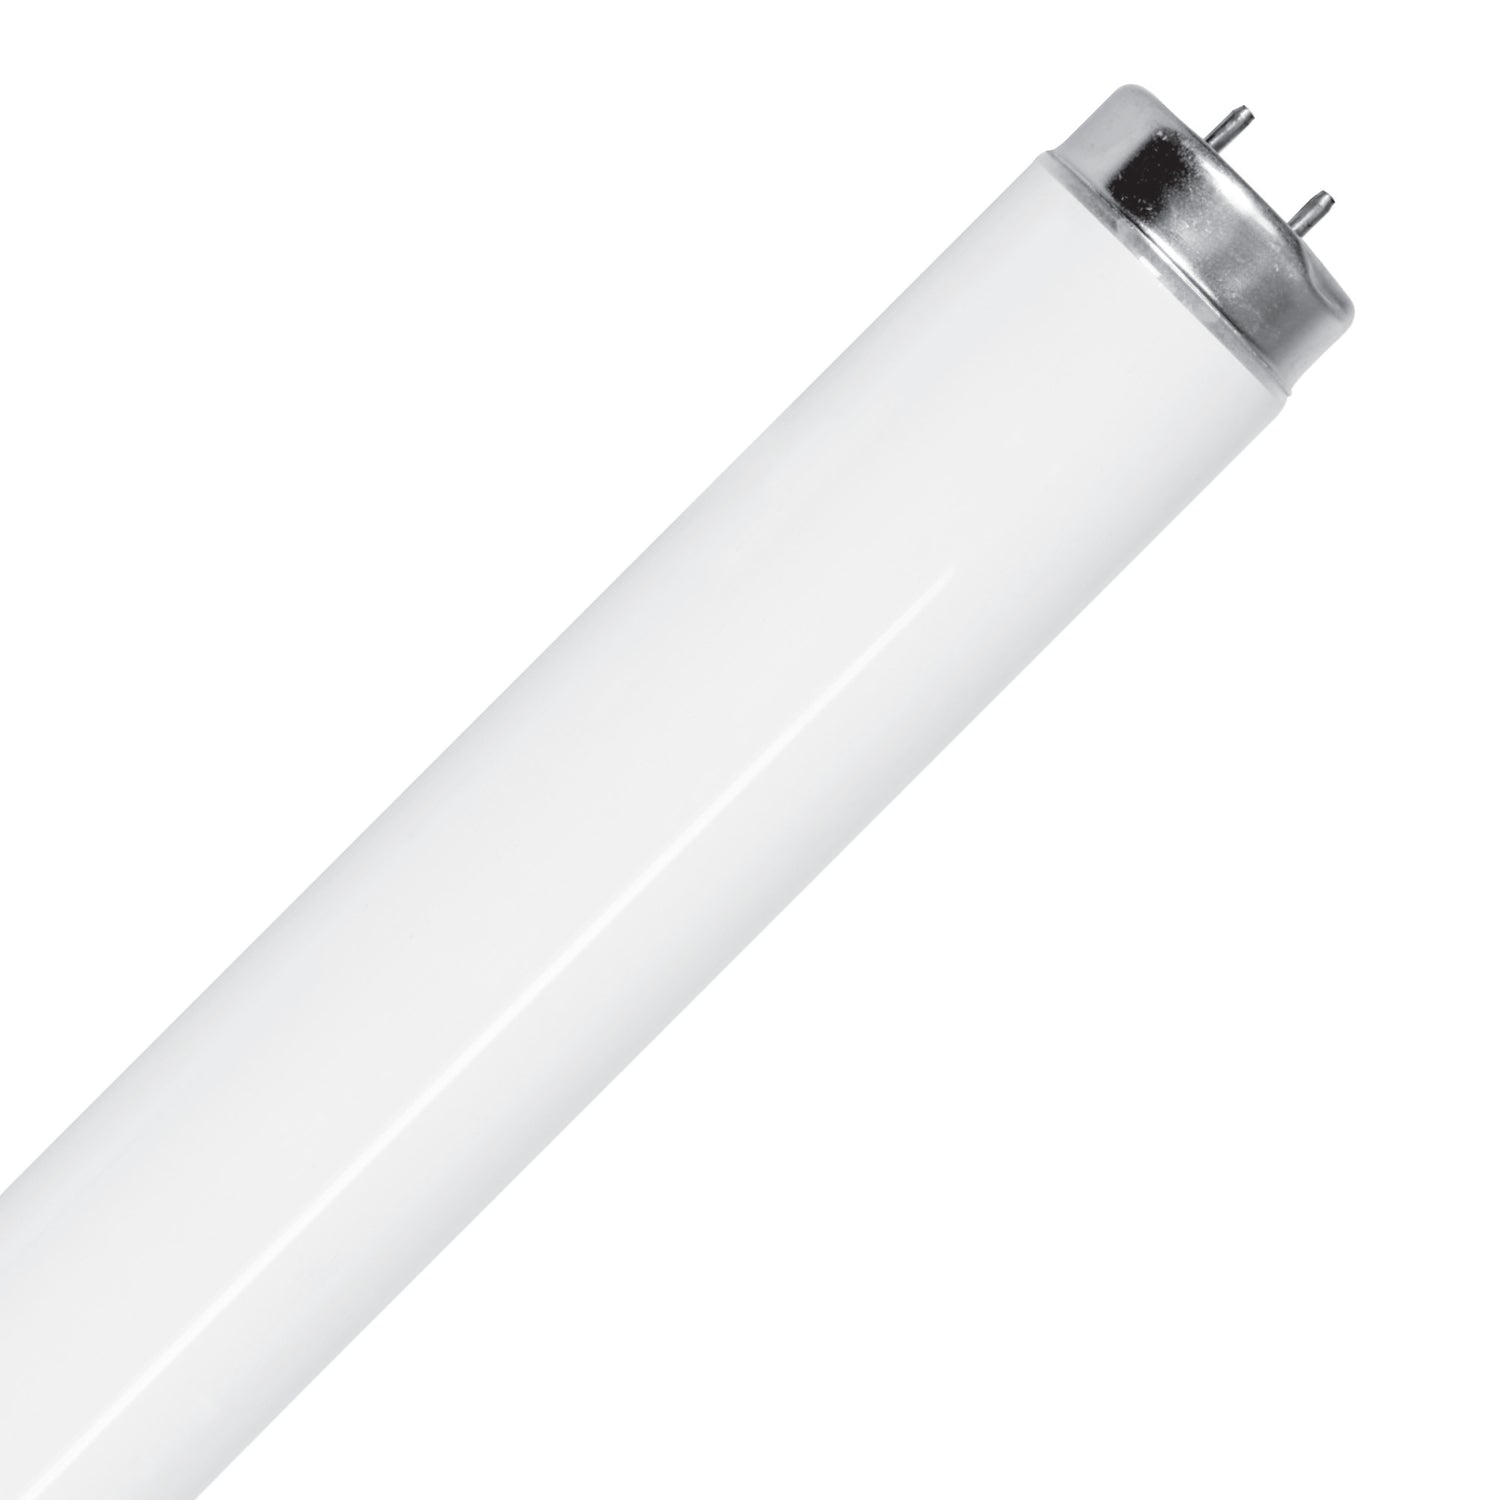 4 ft. 32W Daylight White (5000K) G13 (T8 Replacement) Fluorescent Linear Light Tube (2-Pack)